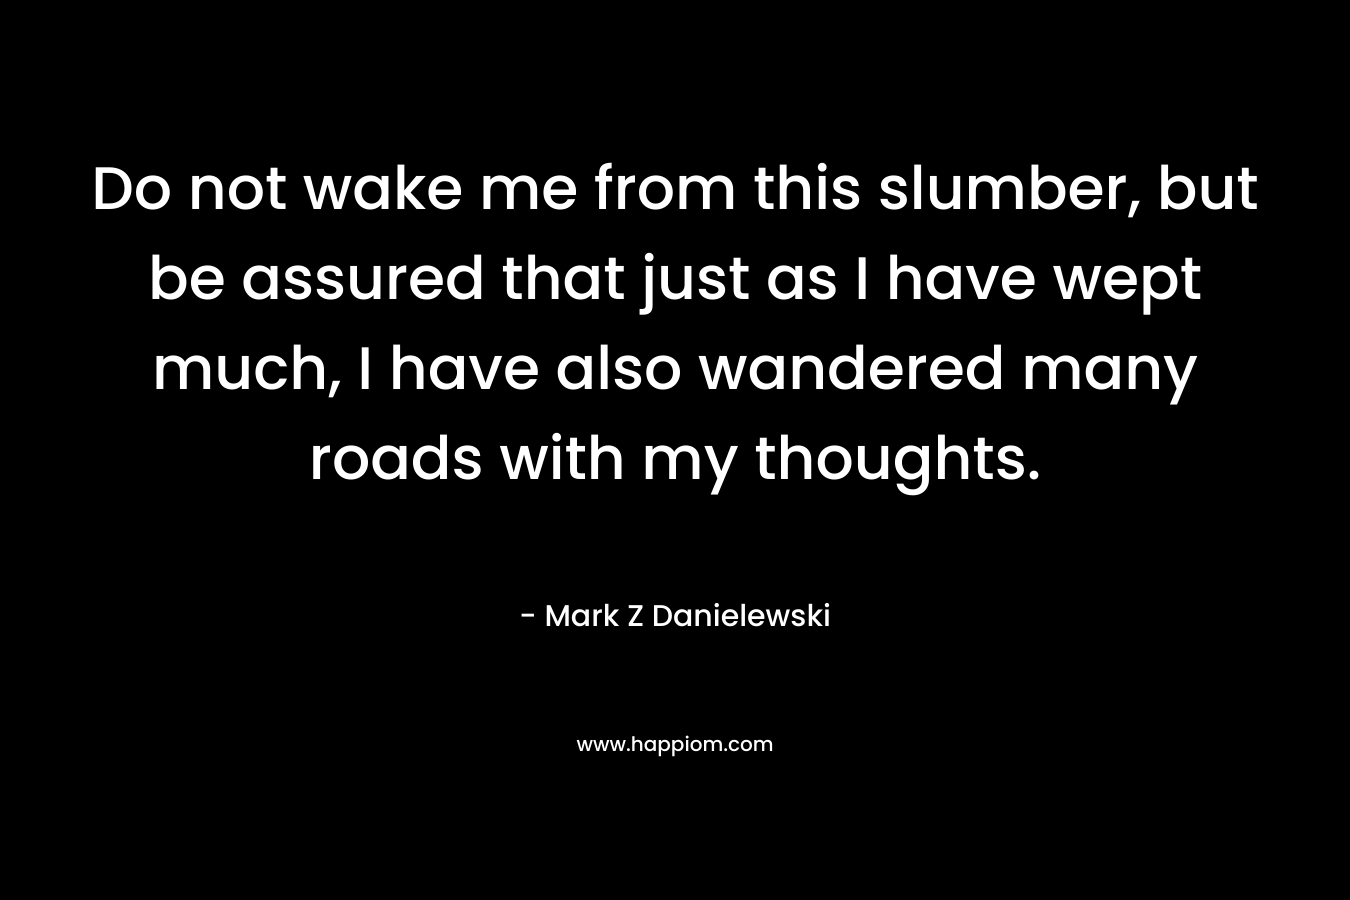 Do not wake me from this slumber, but be assured that just as I have wept much, I have also wandered many roads with my thoughts. – Mark Z Danielewski